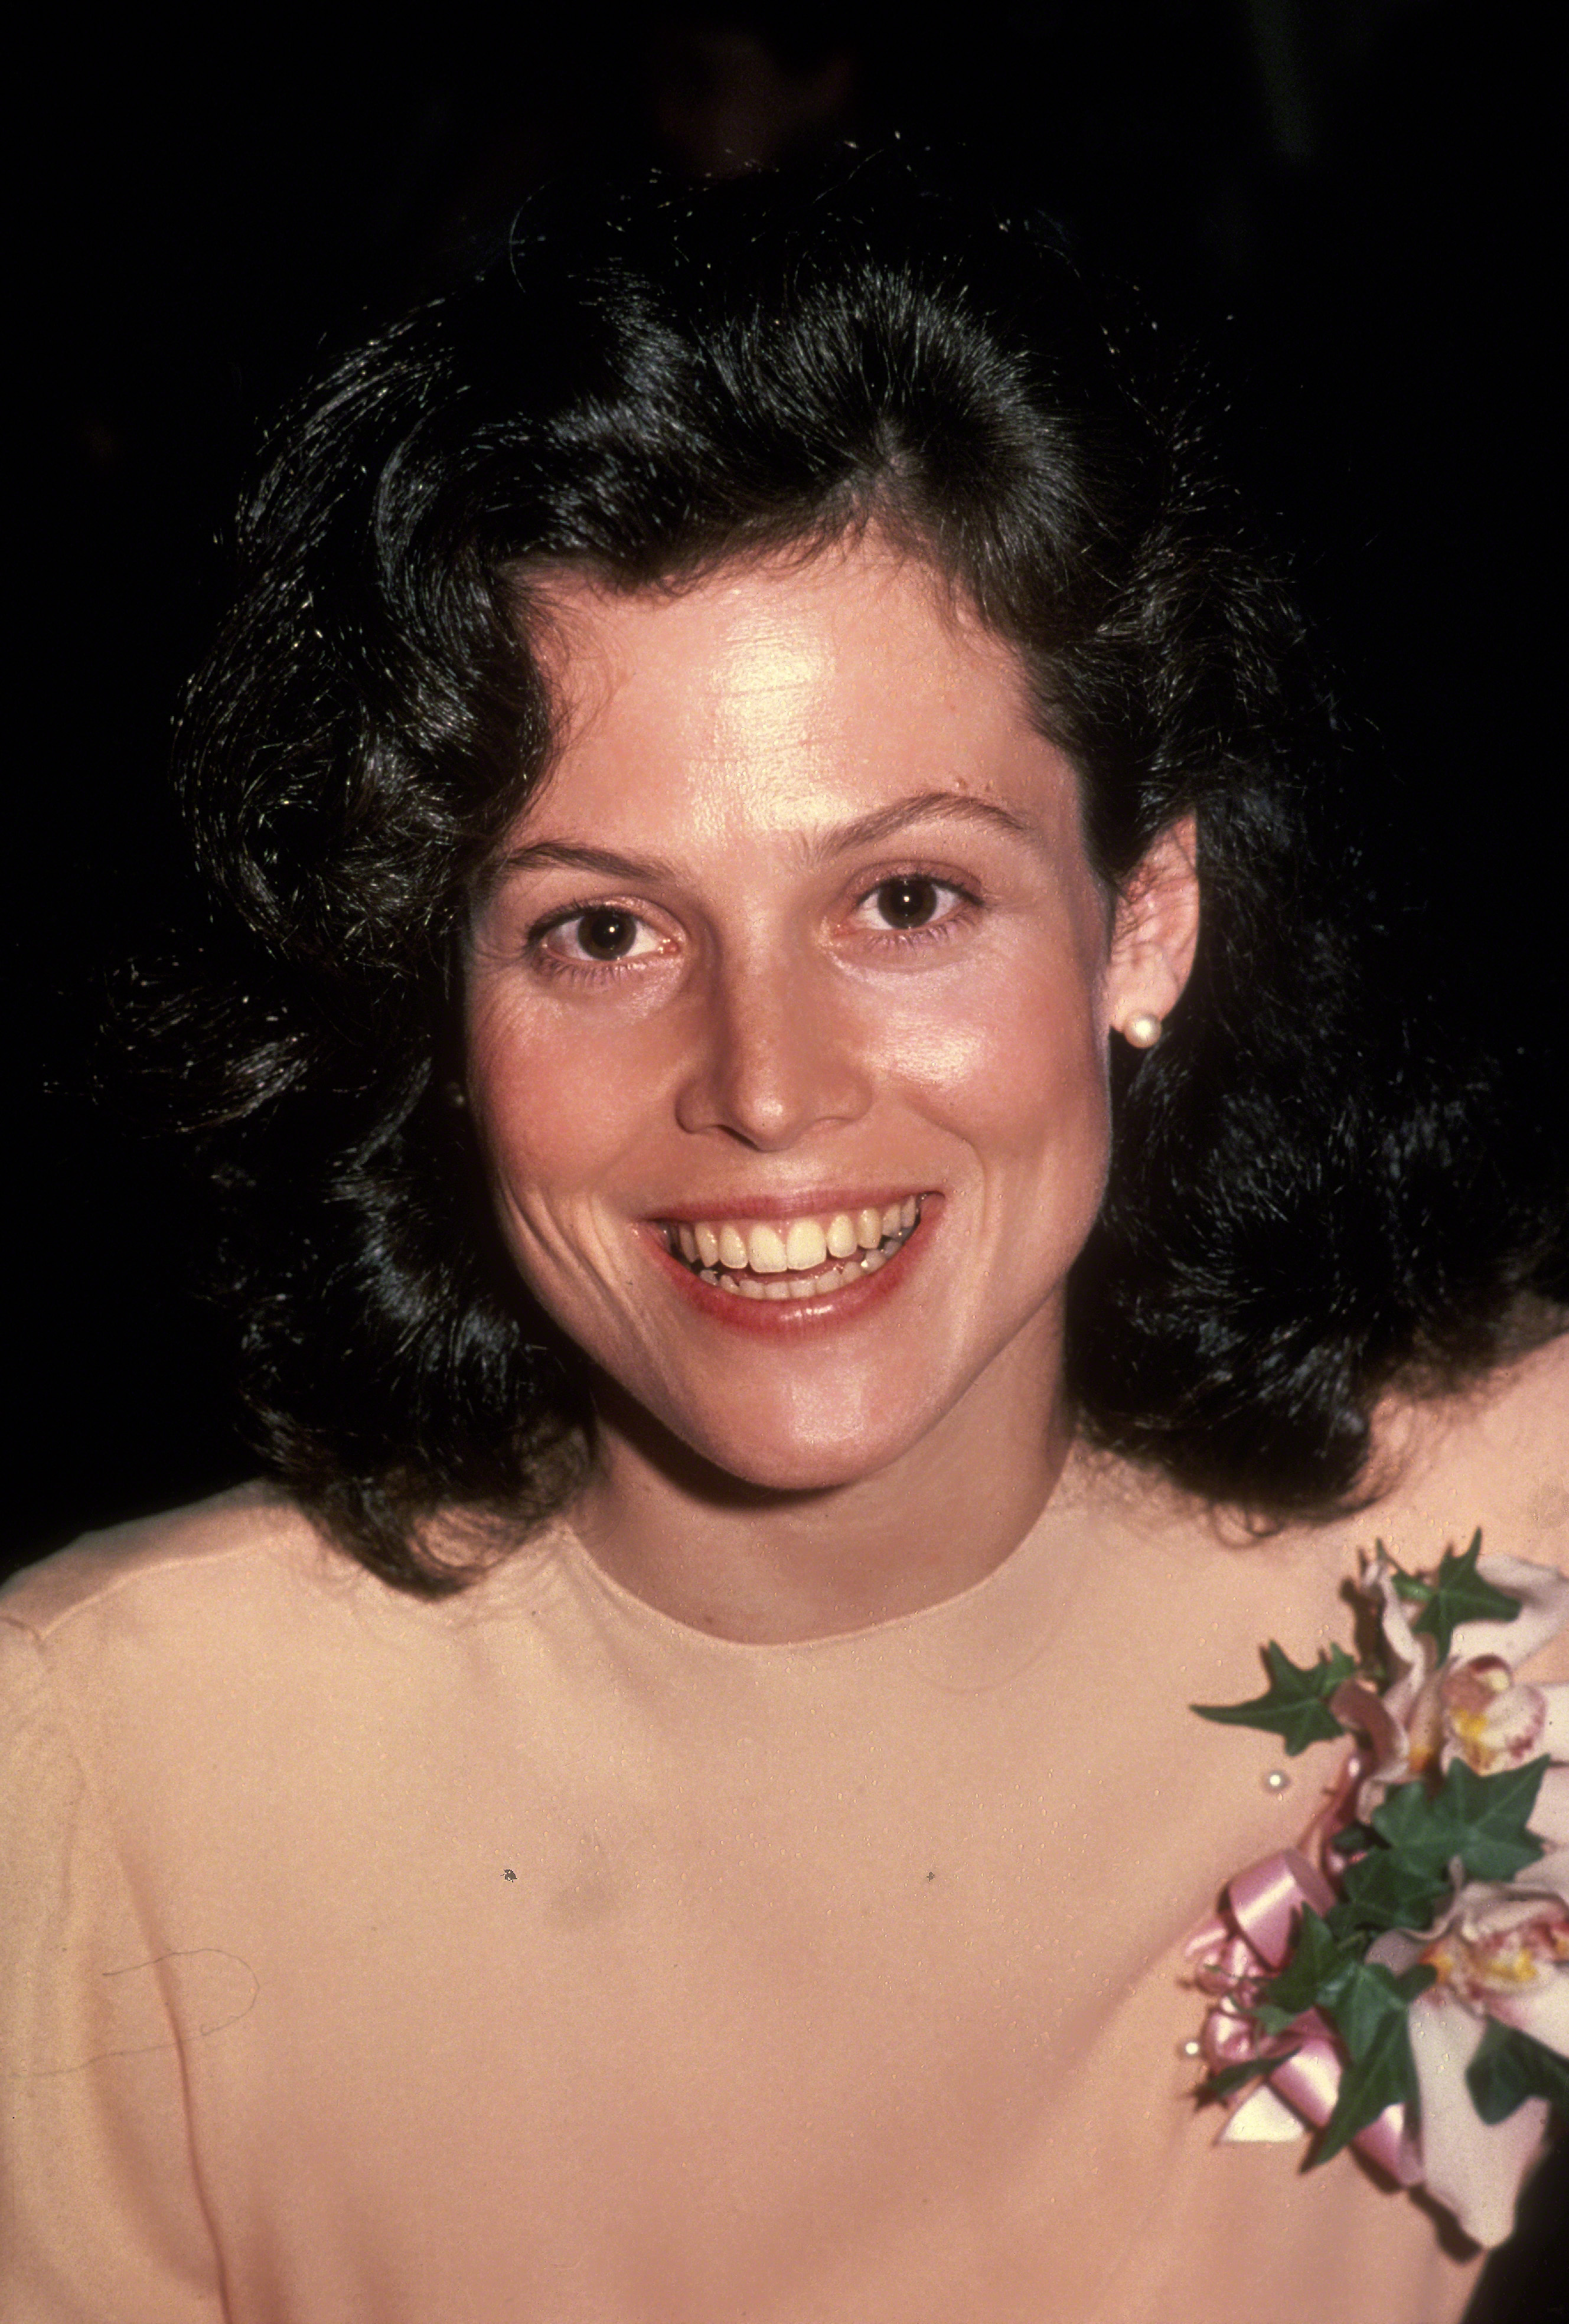 Sigourney Weaver pictured on January 1, 1980 in New York City. | Source: Getty Images